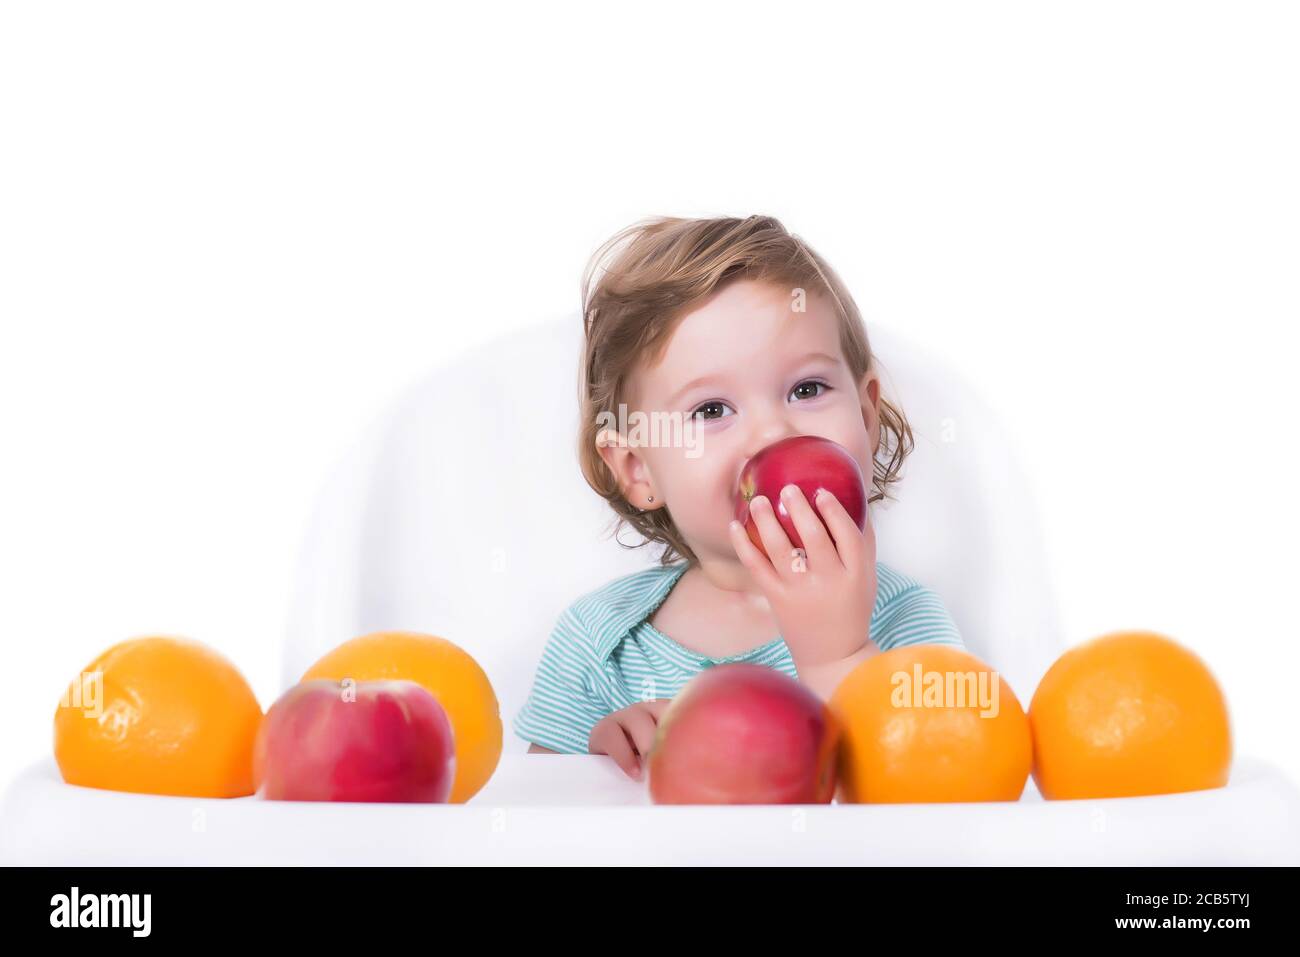 An adorable baby playing with apples and oranges on an isolated background Stock Photo